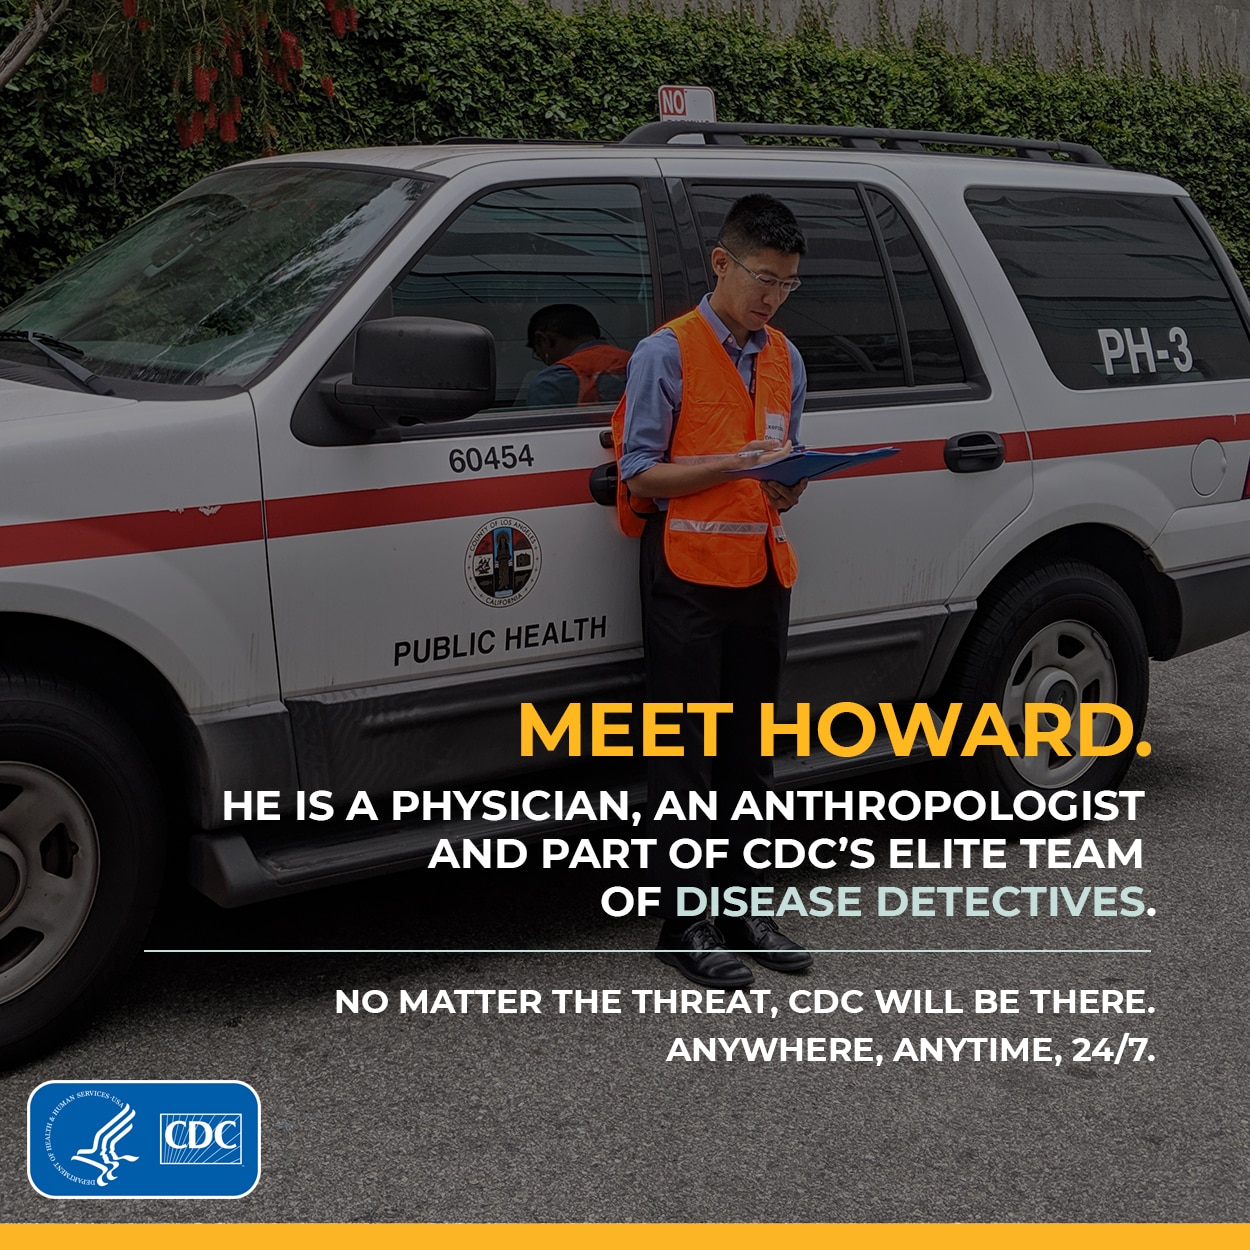 Meet Howard. He is a Physician, an anthropologist and part of CDC's Elite Team of disease detectives. No matter the threat, CDC Will be there. Anywhere, Anytime, 24/7.